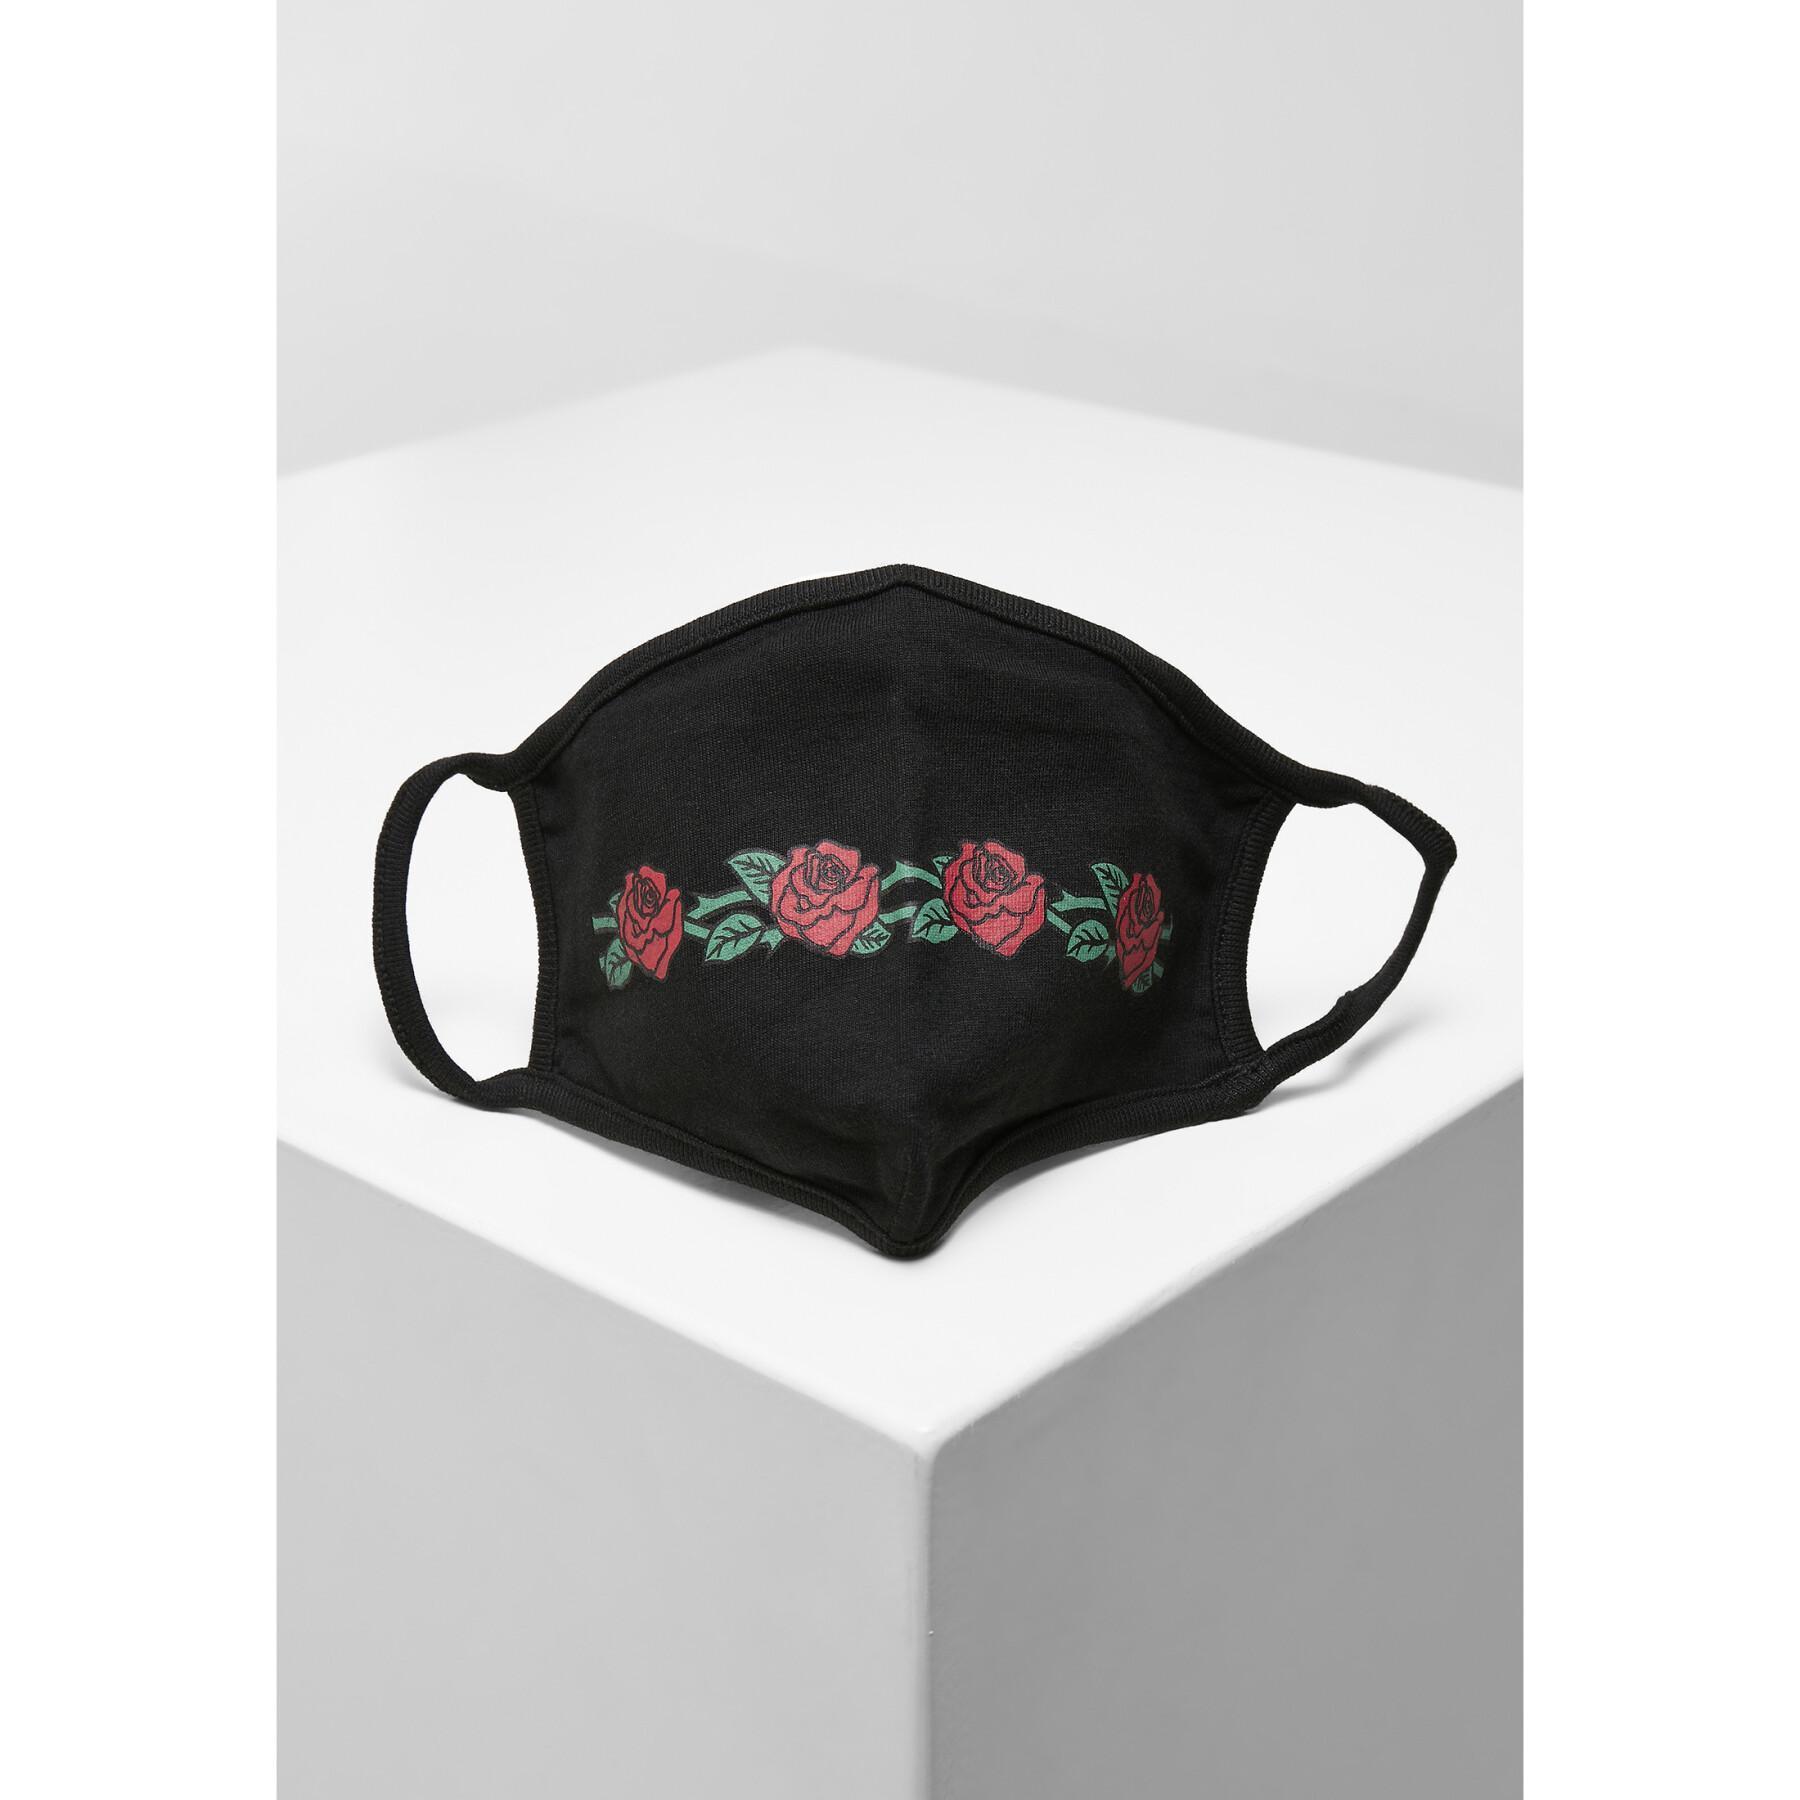 Maskers Mister Tee roses (x2)